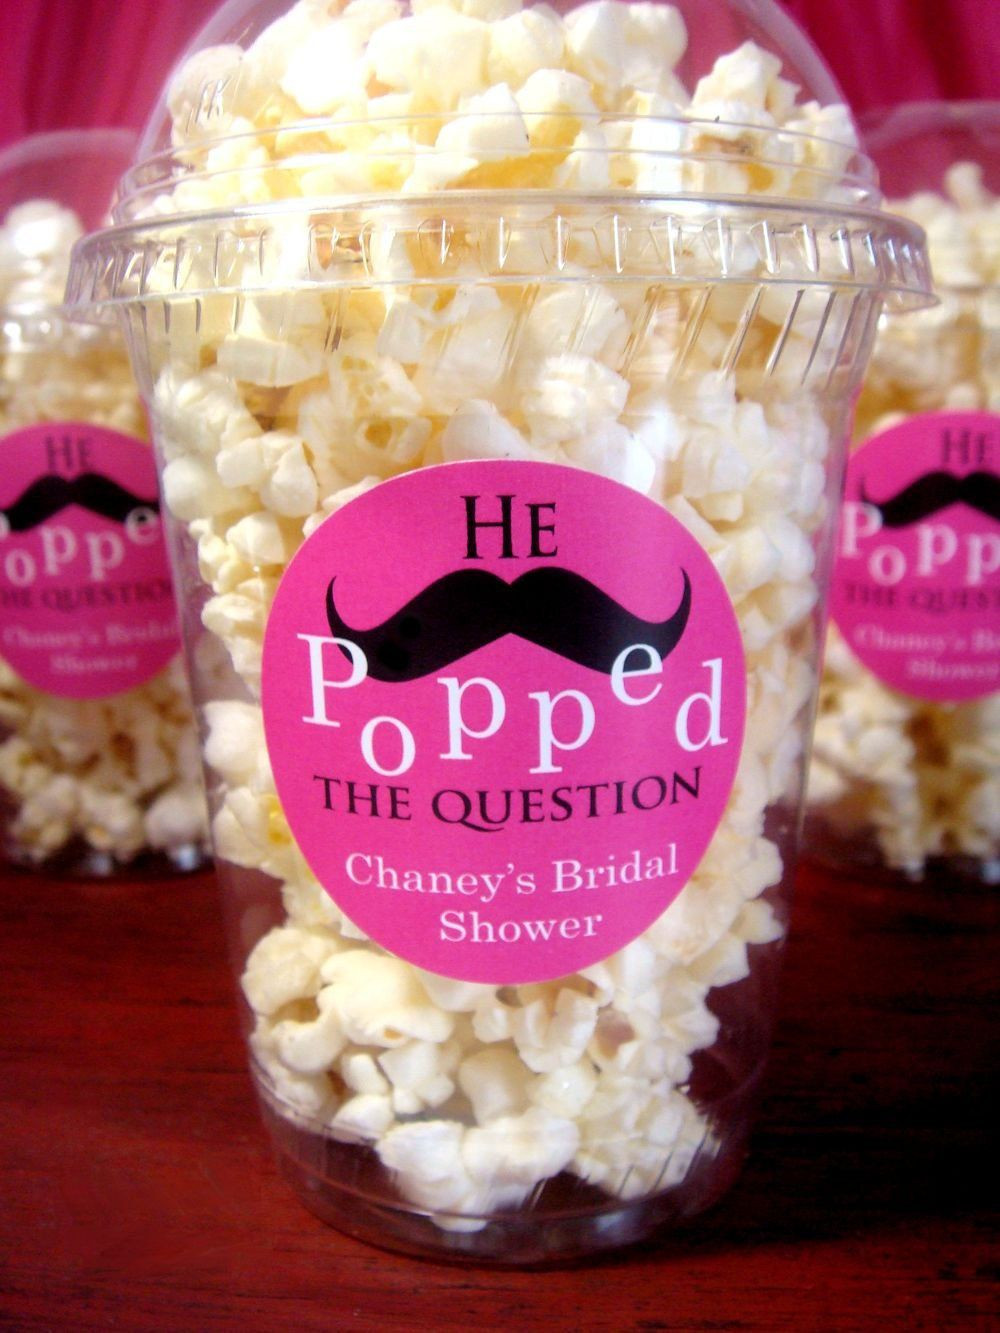 Kitchen Tea Party Food Ideas
 Proposal Popcorn such a cute idea even if we don t have